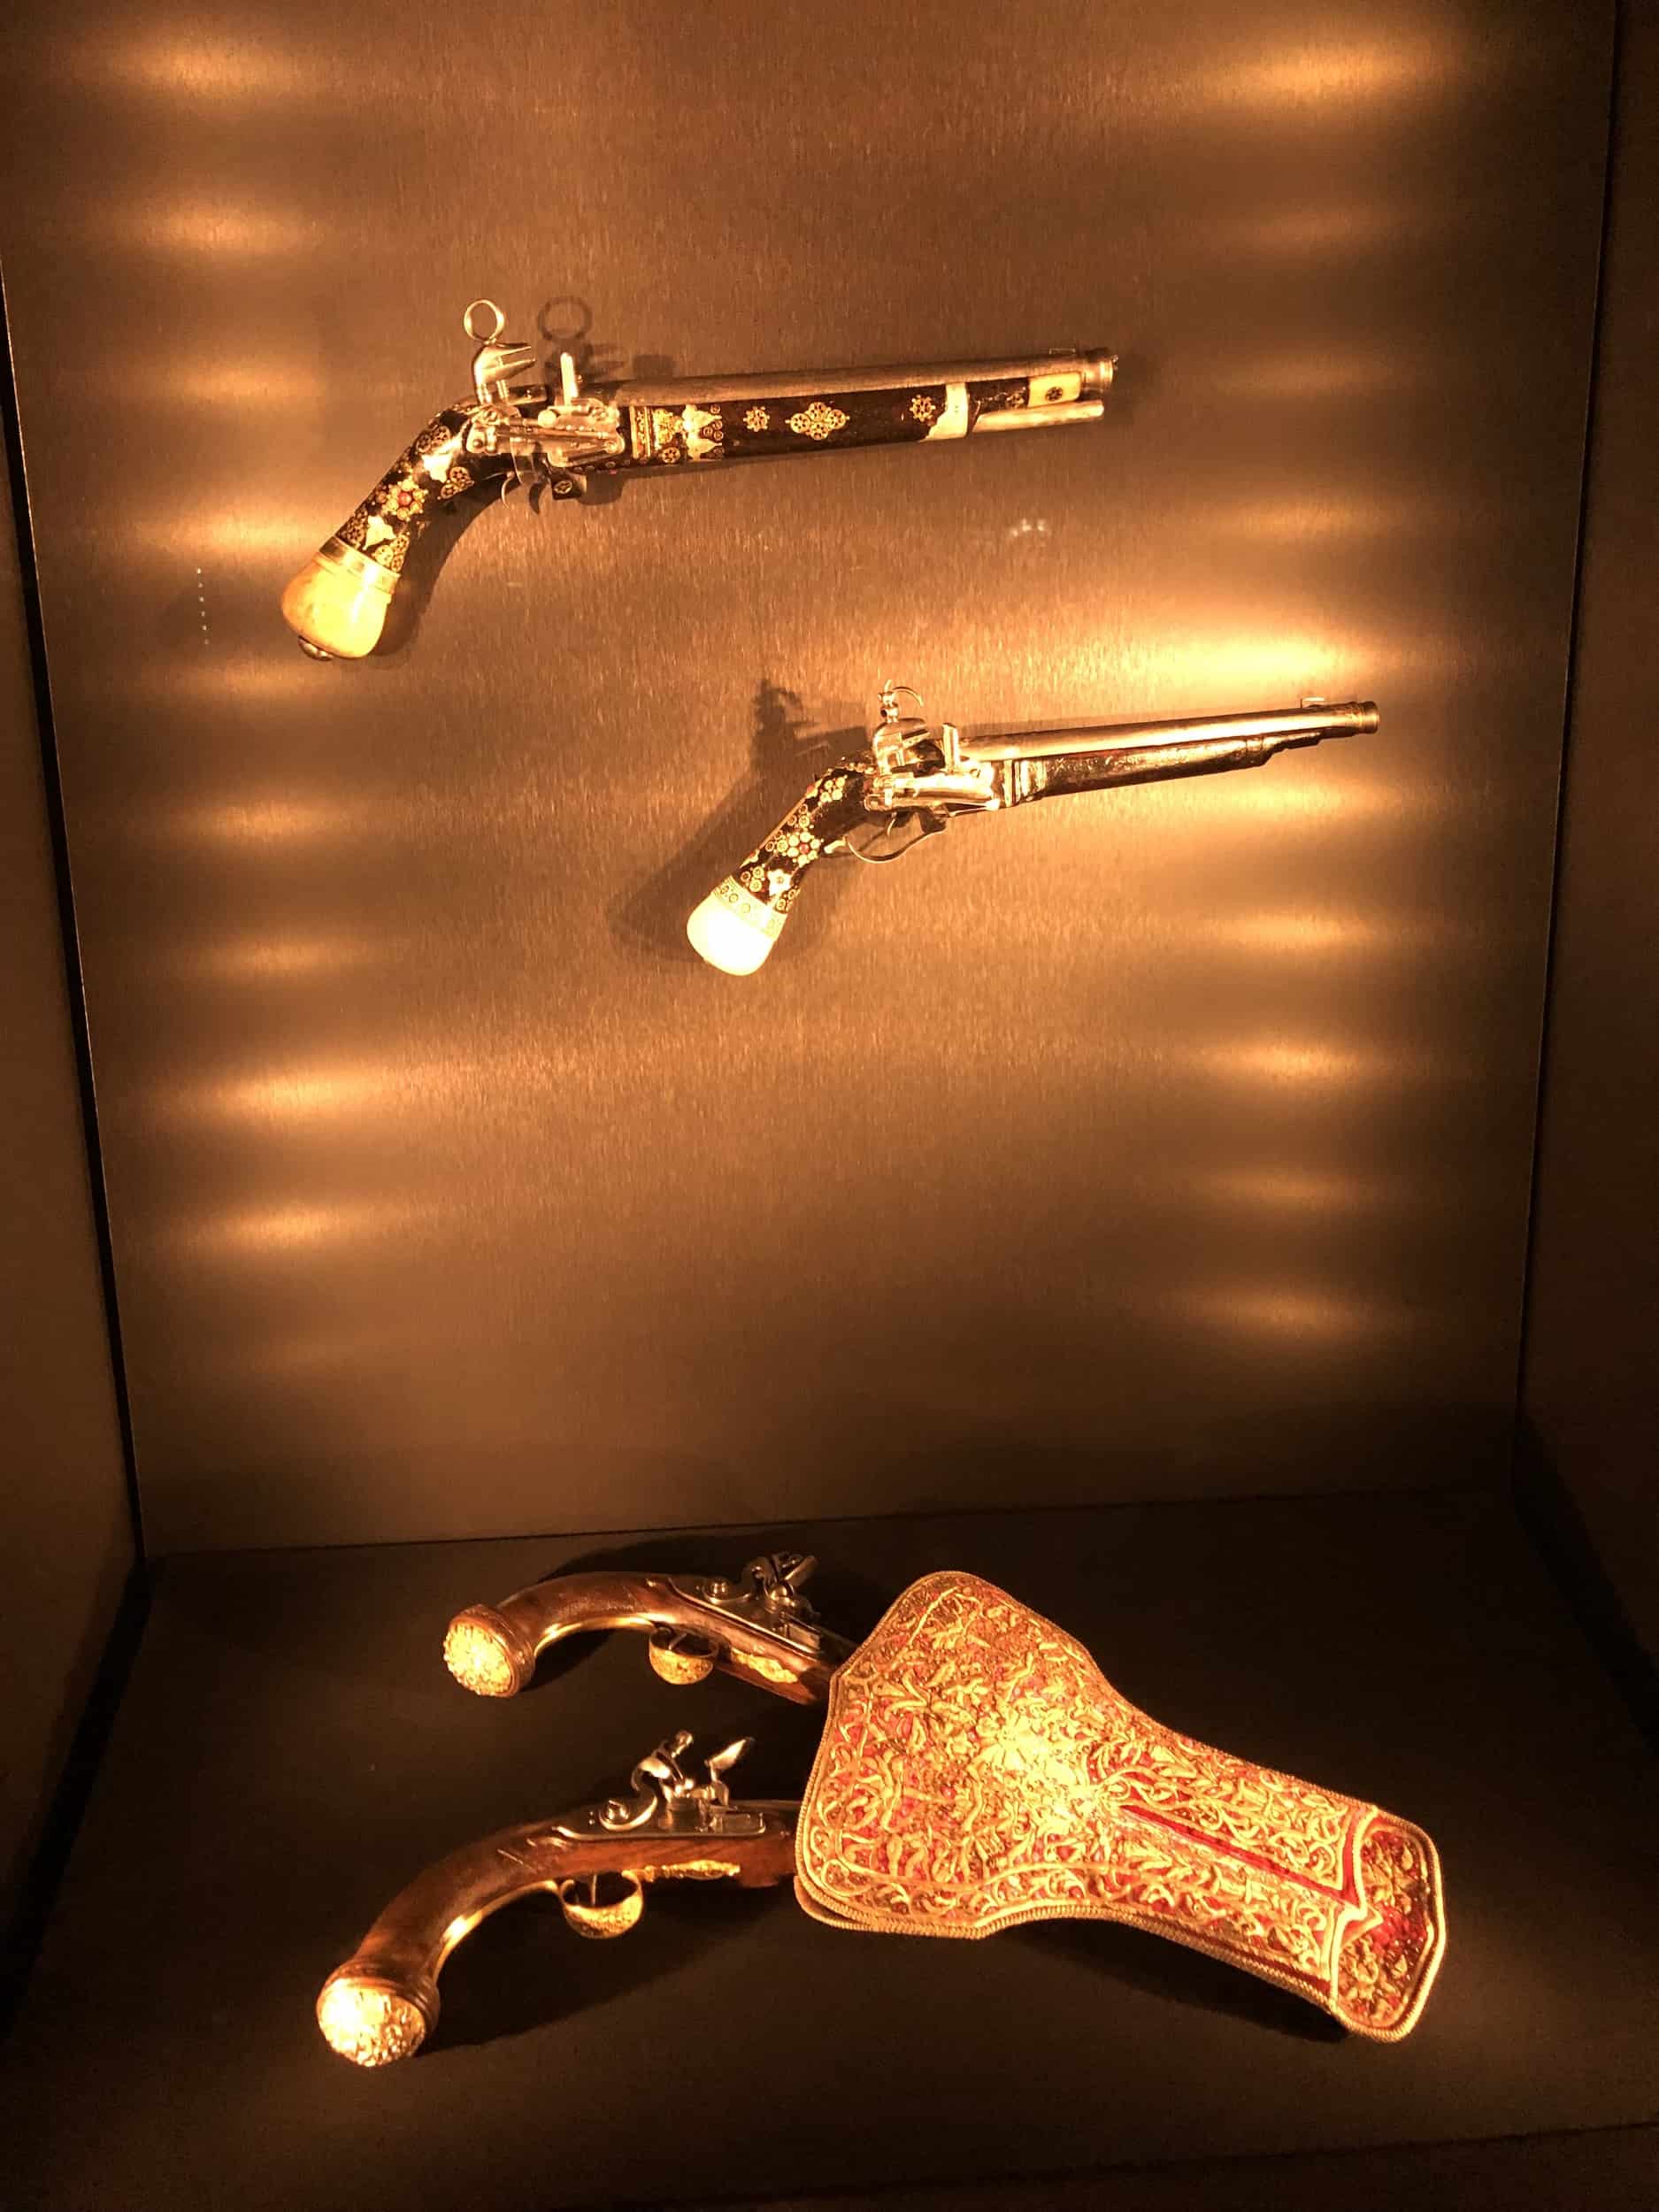 Pistols in the weapons collection